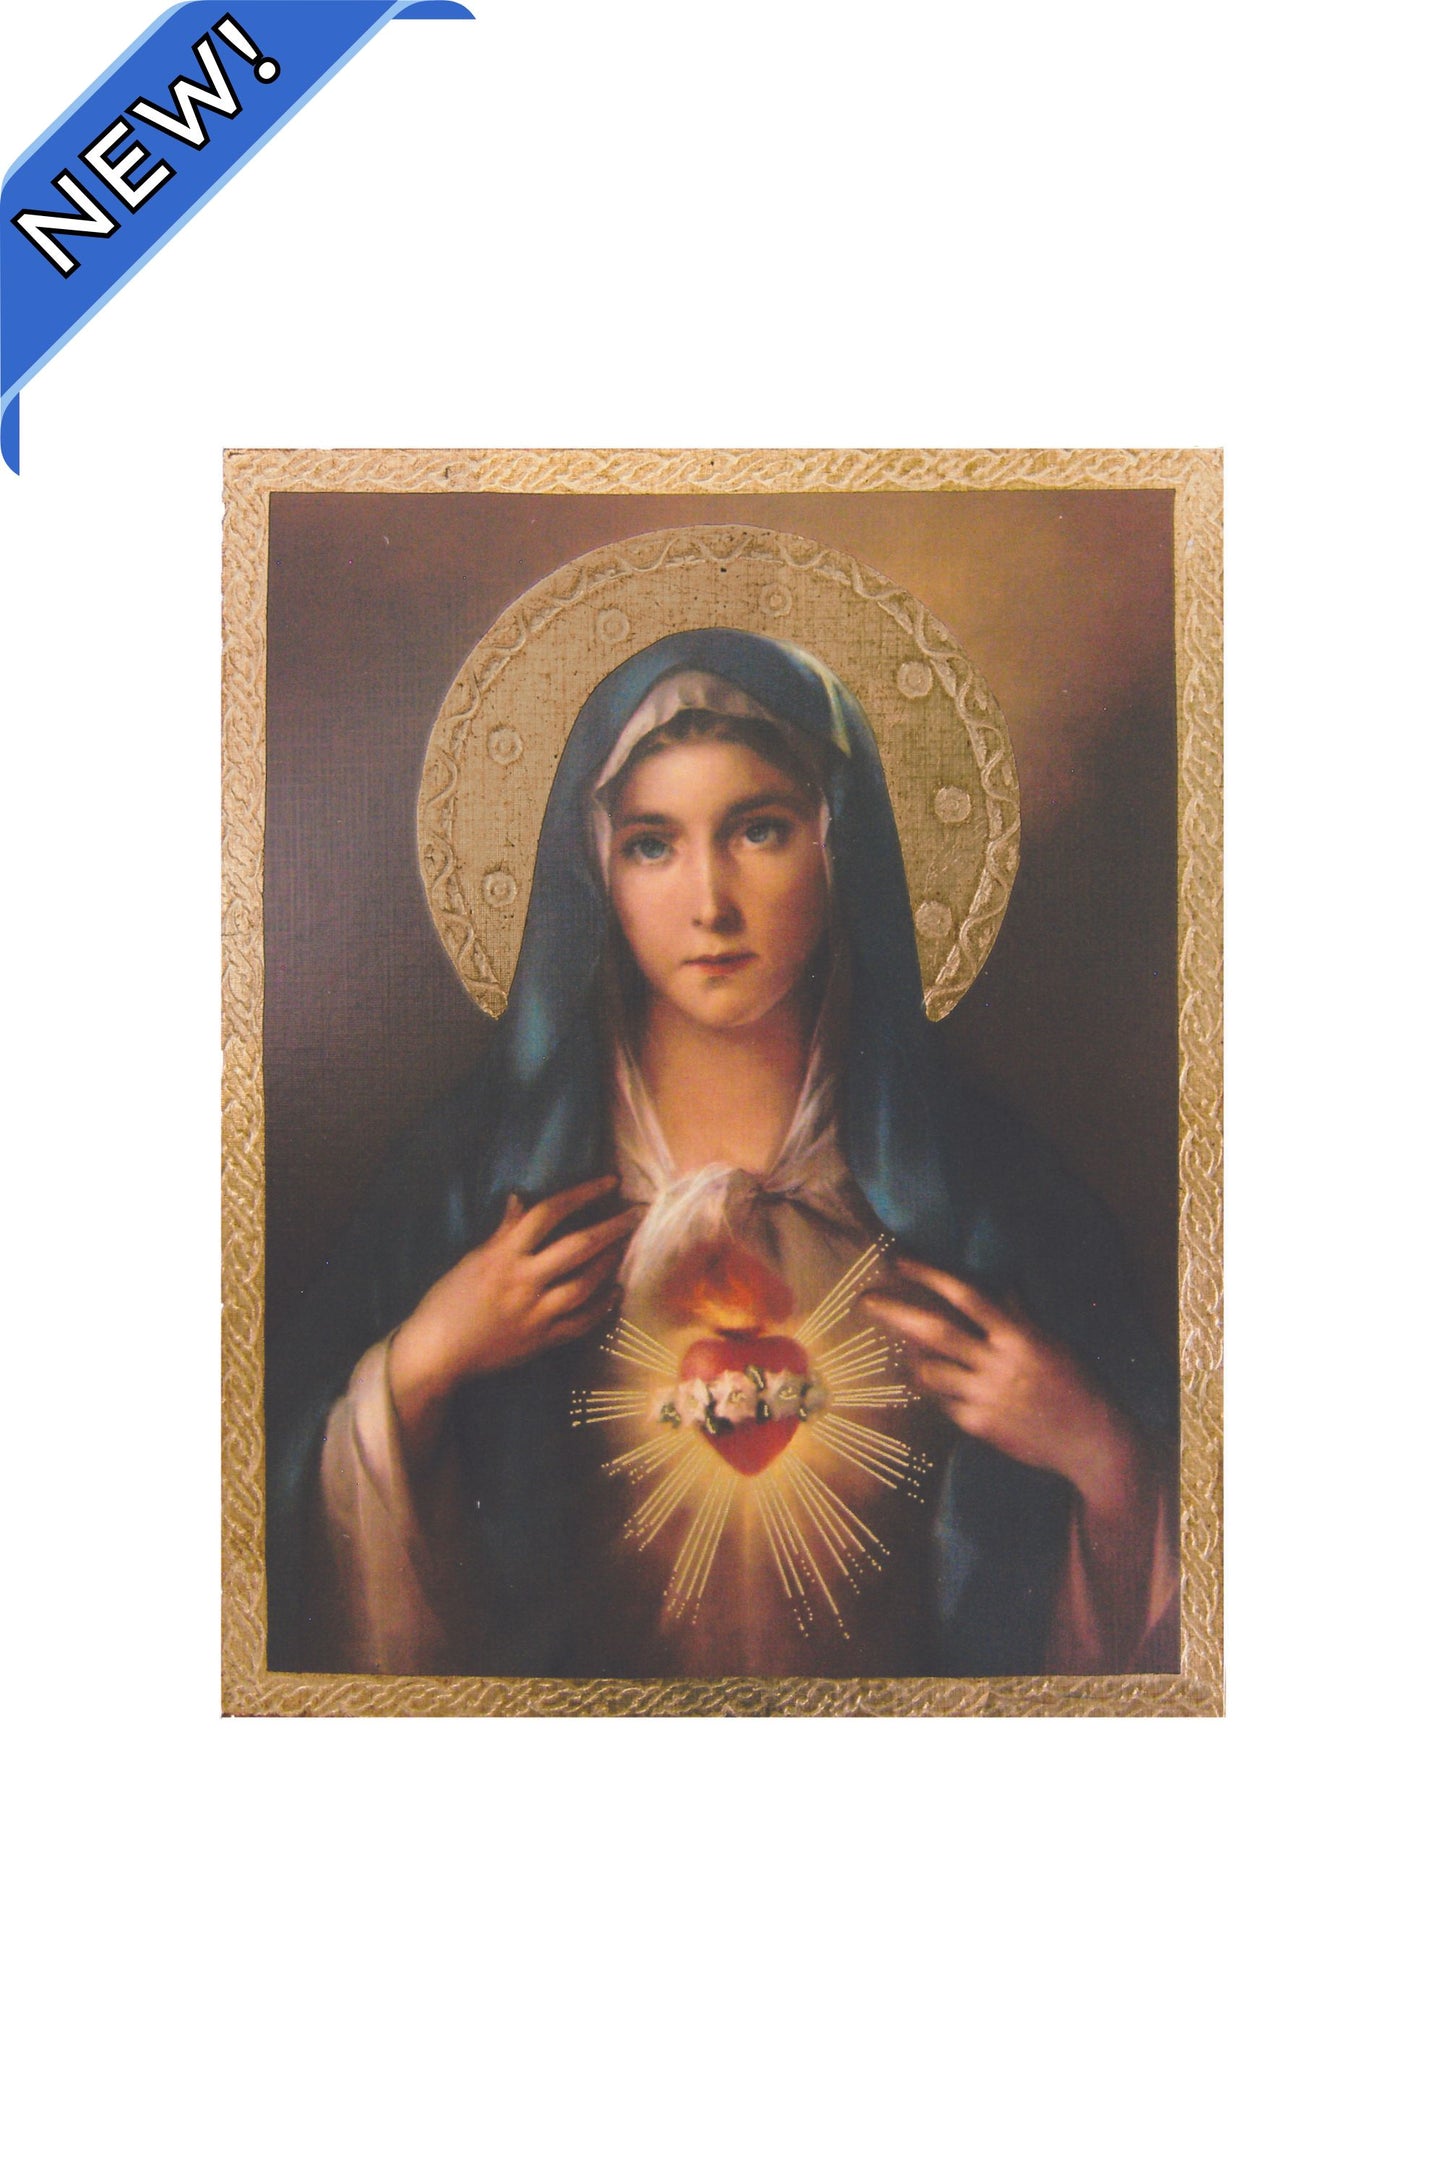 L-148-1018 Immaculate Heart of Mary Florentine Plaque 8x10"